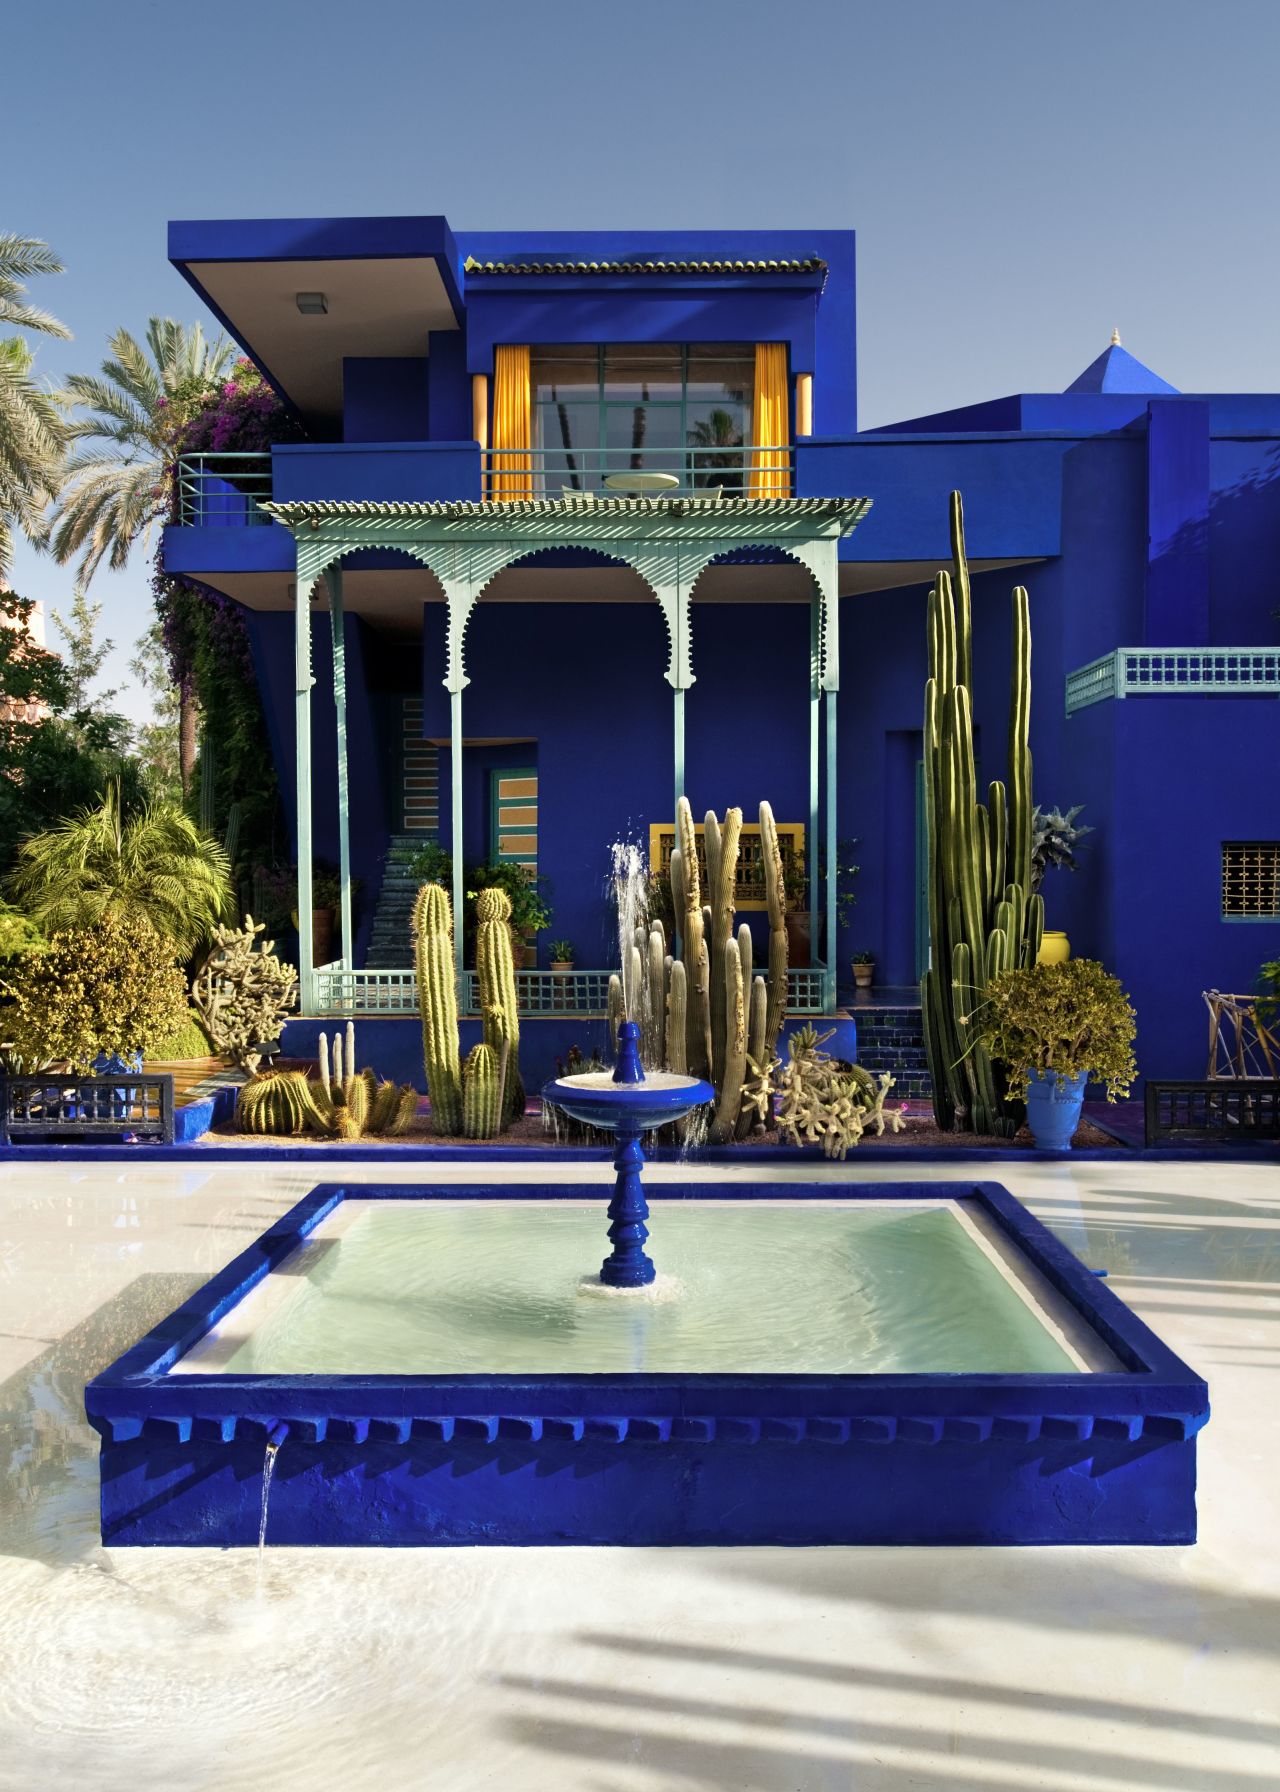 Majorelle's studio was converted into Morocco's first Berber museum, celebrating the rich culture and particularly fashion that Saint Laurent integrated into his designs.